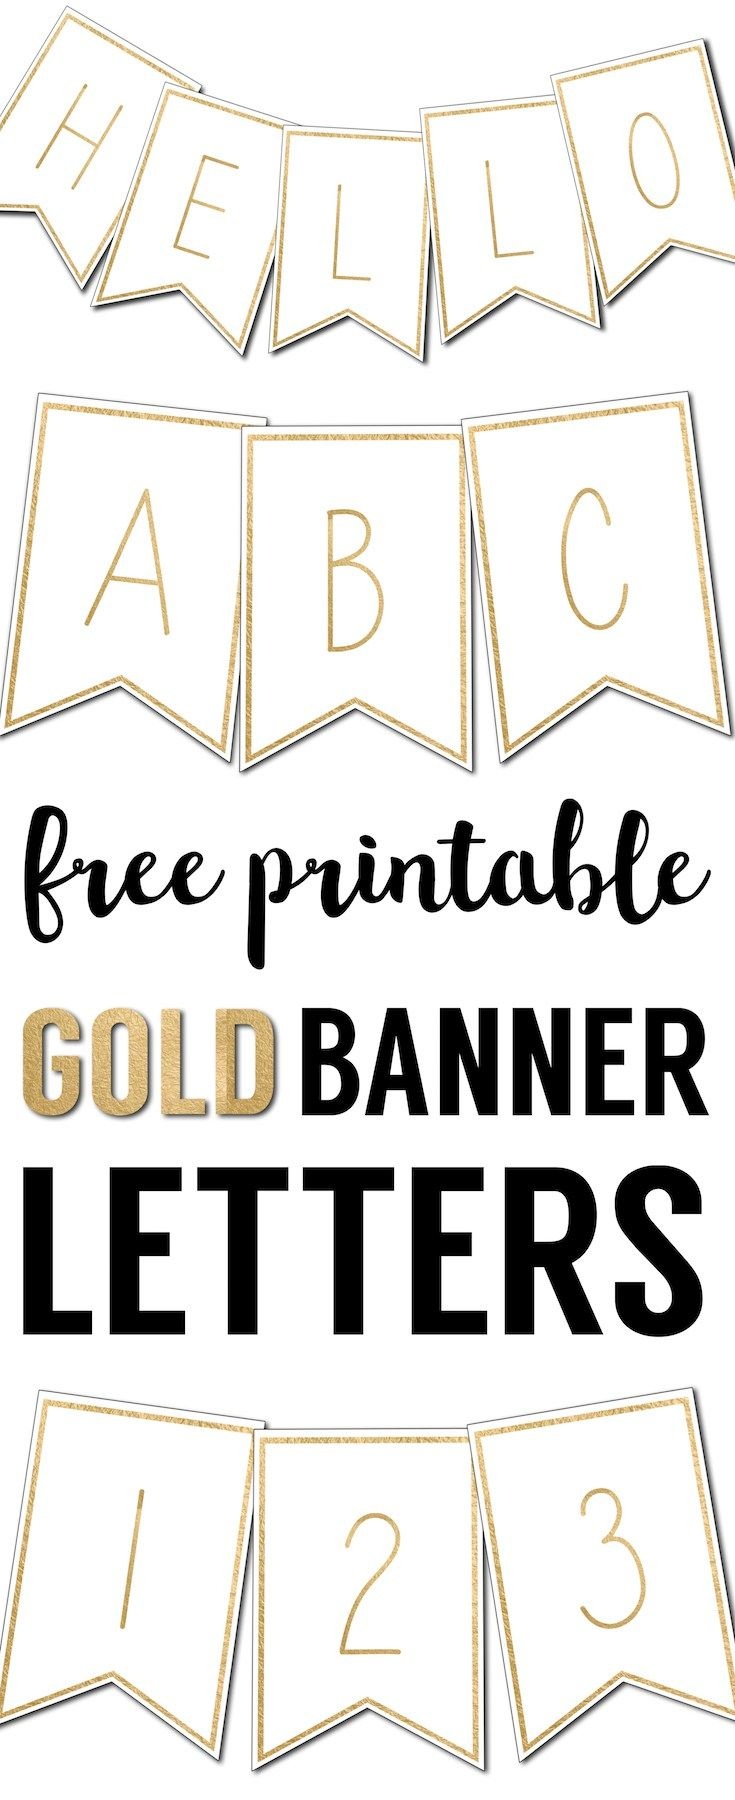 Free Printable Banner Letters Templates | The Wedding Stuff | Free - Free Printable Wedding Banner Letters